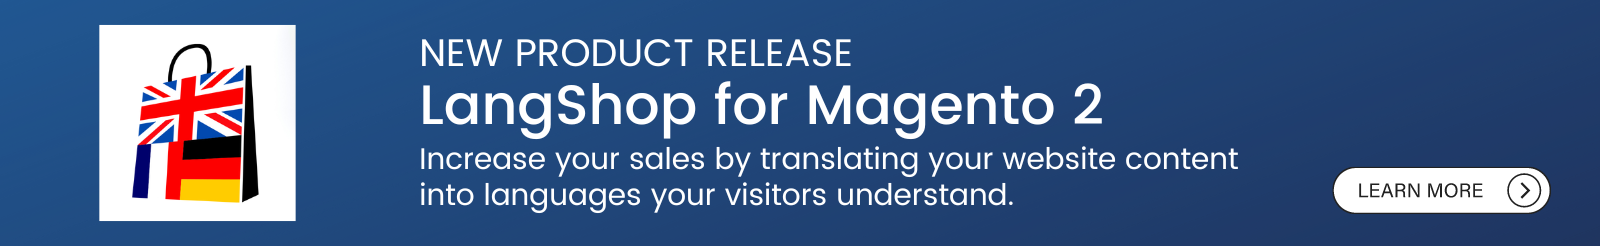 New Product Release LangShop for Magento 2 Increase your sales by translating your website content into languages your visitors understand. -50% FIRST YEAR coupon code M2LS50 